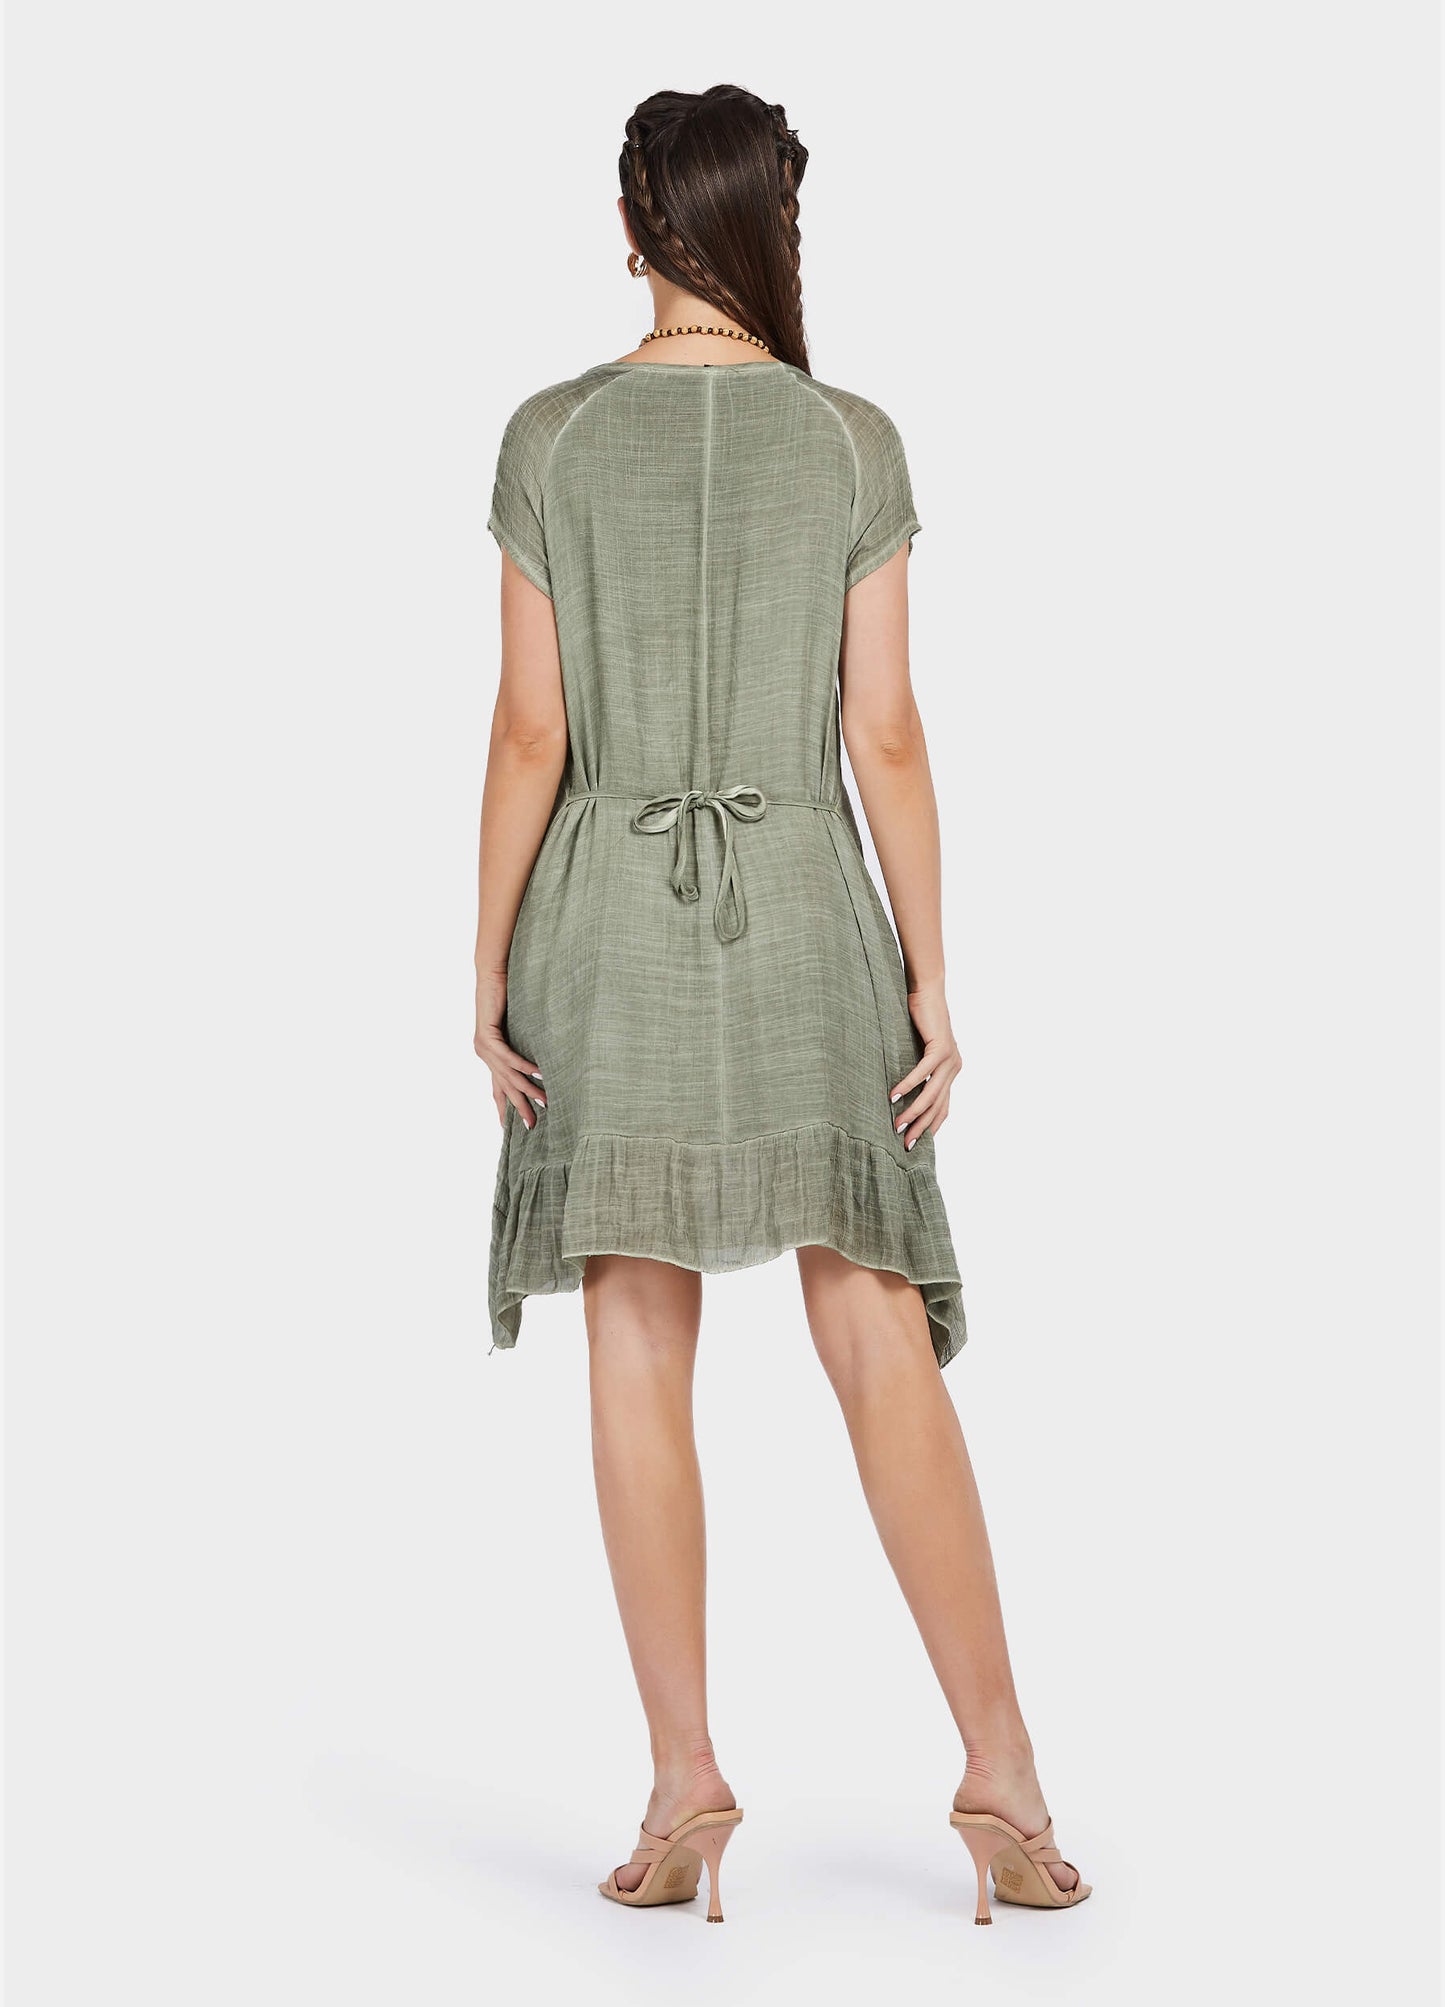 MECALA Women's Linen Scoop Neck Short Sleeve Dress with Wooden Four Leaves Clover Necklace-Green back view